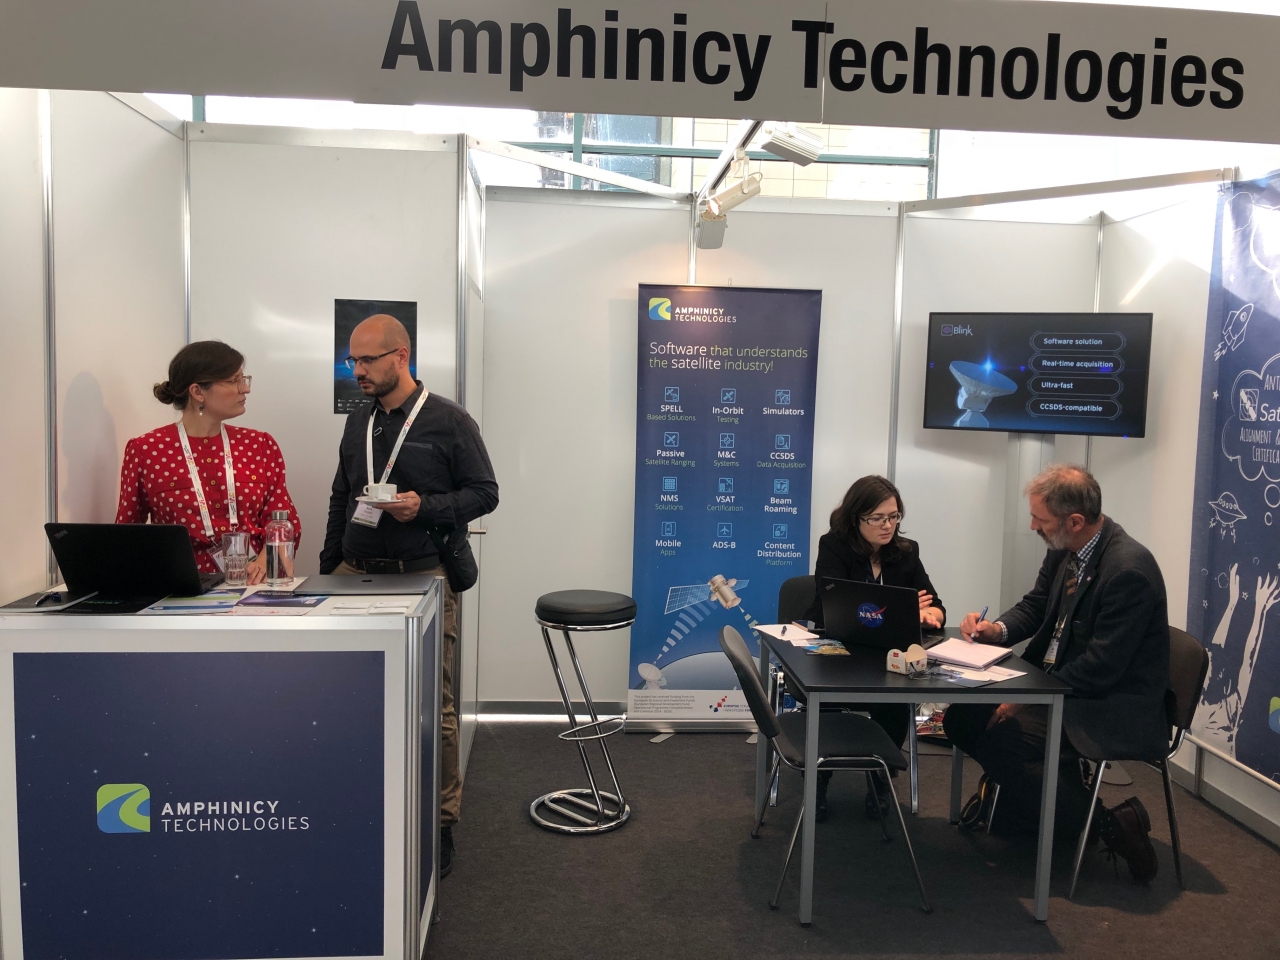 Amphinicy booth, source: private photo